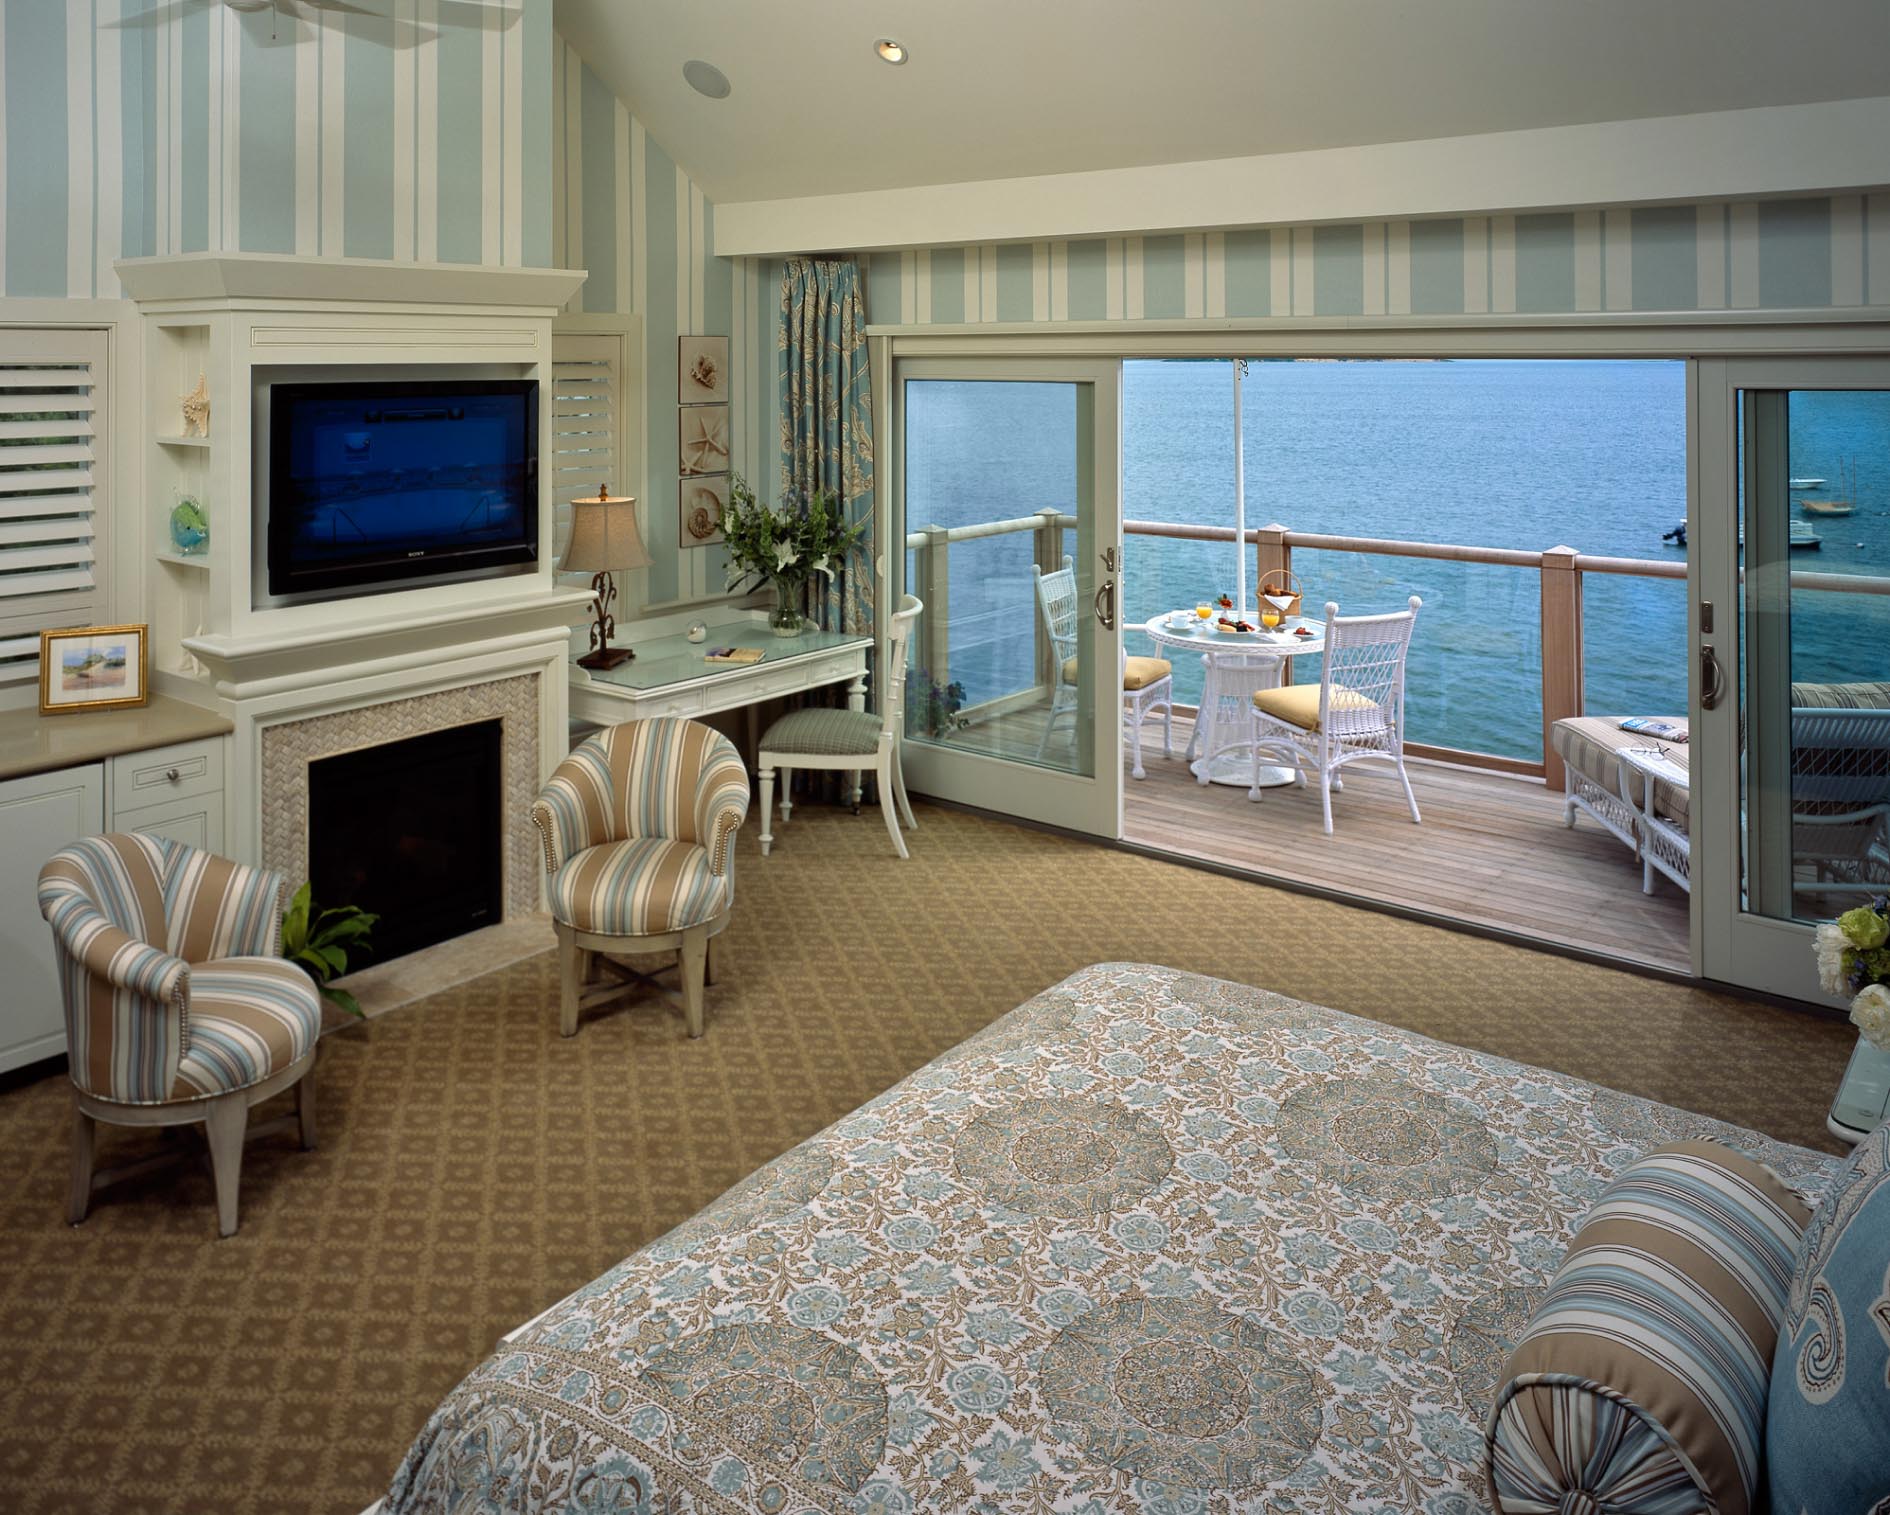 Hotel room with ocean view.